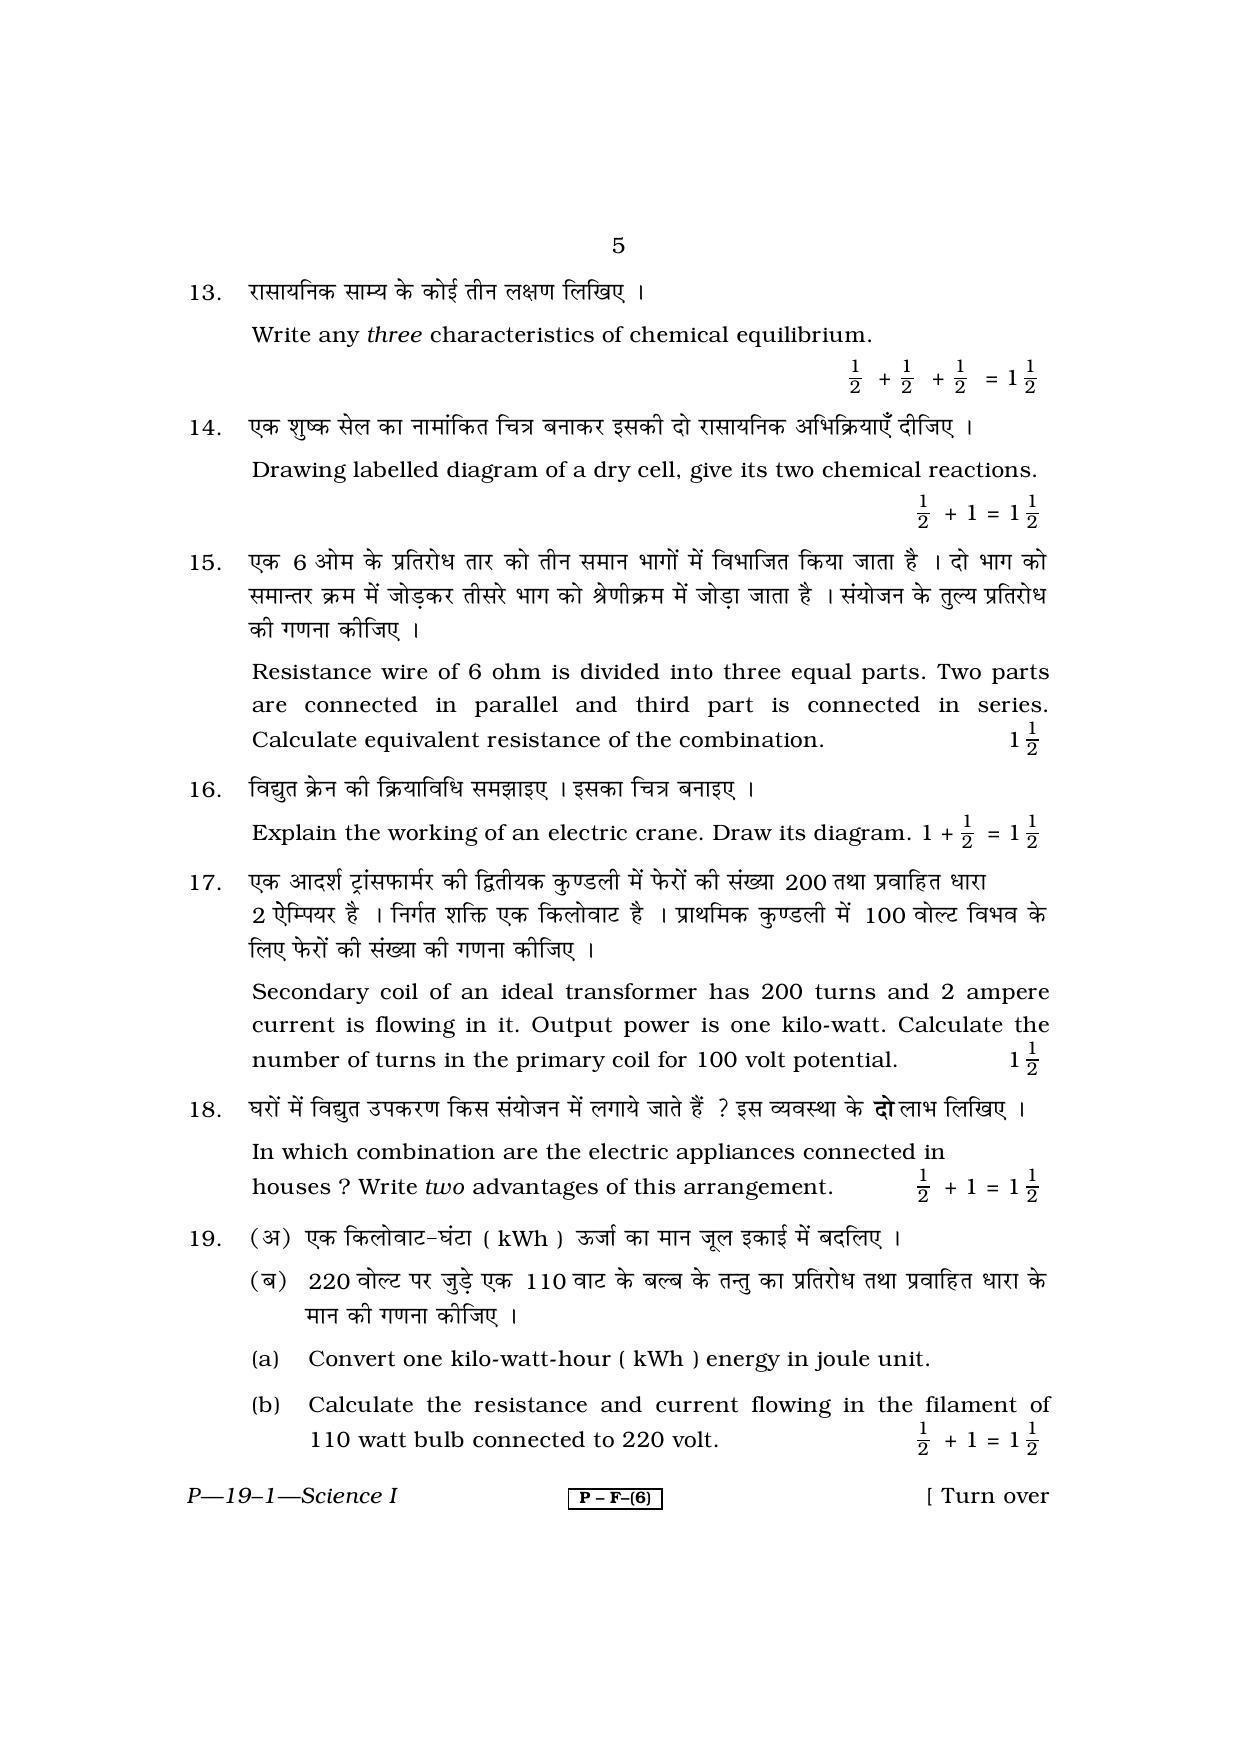 RBSE 2011 Science Praveshika Question Paper - Page 5